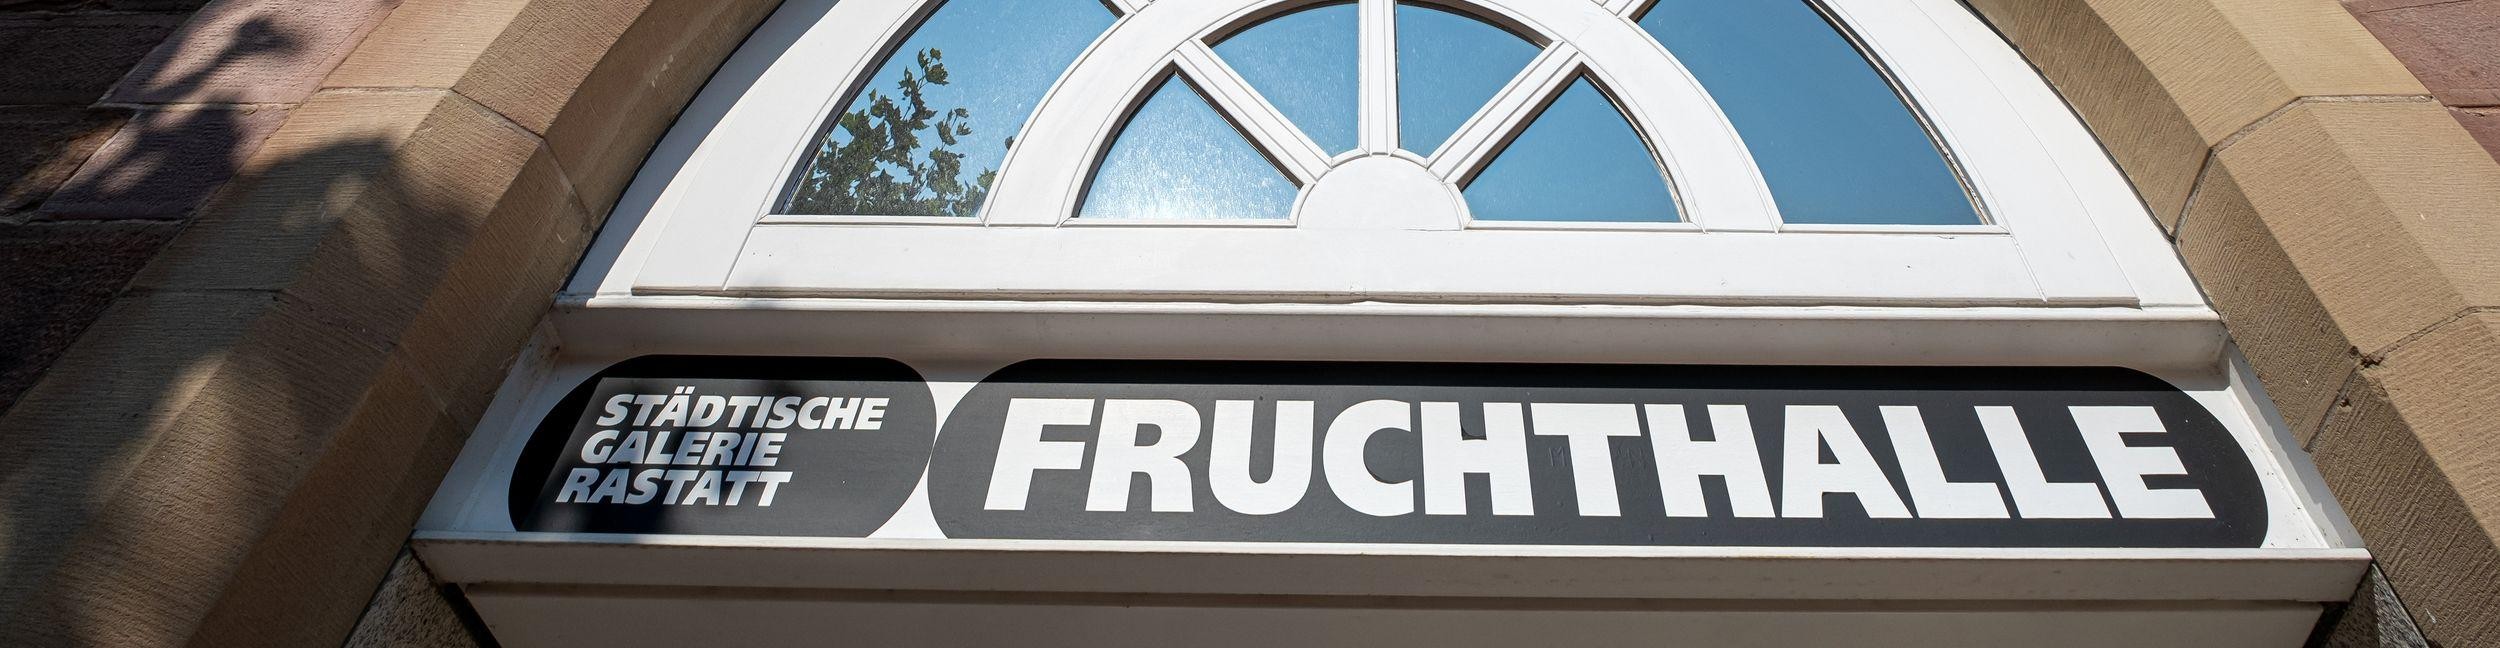 Lettering "Fruchthalle" above the entrance to the municipal gallery Fruchthalle Rastsattt.